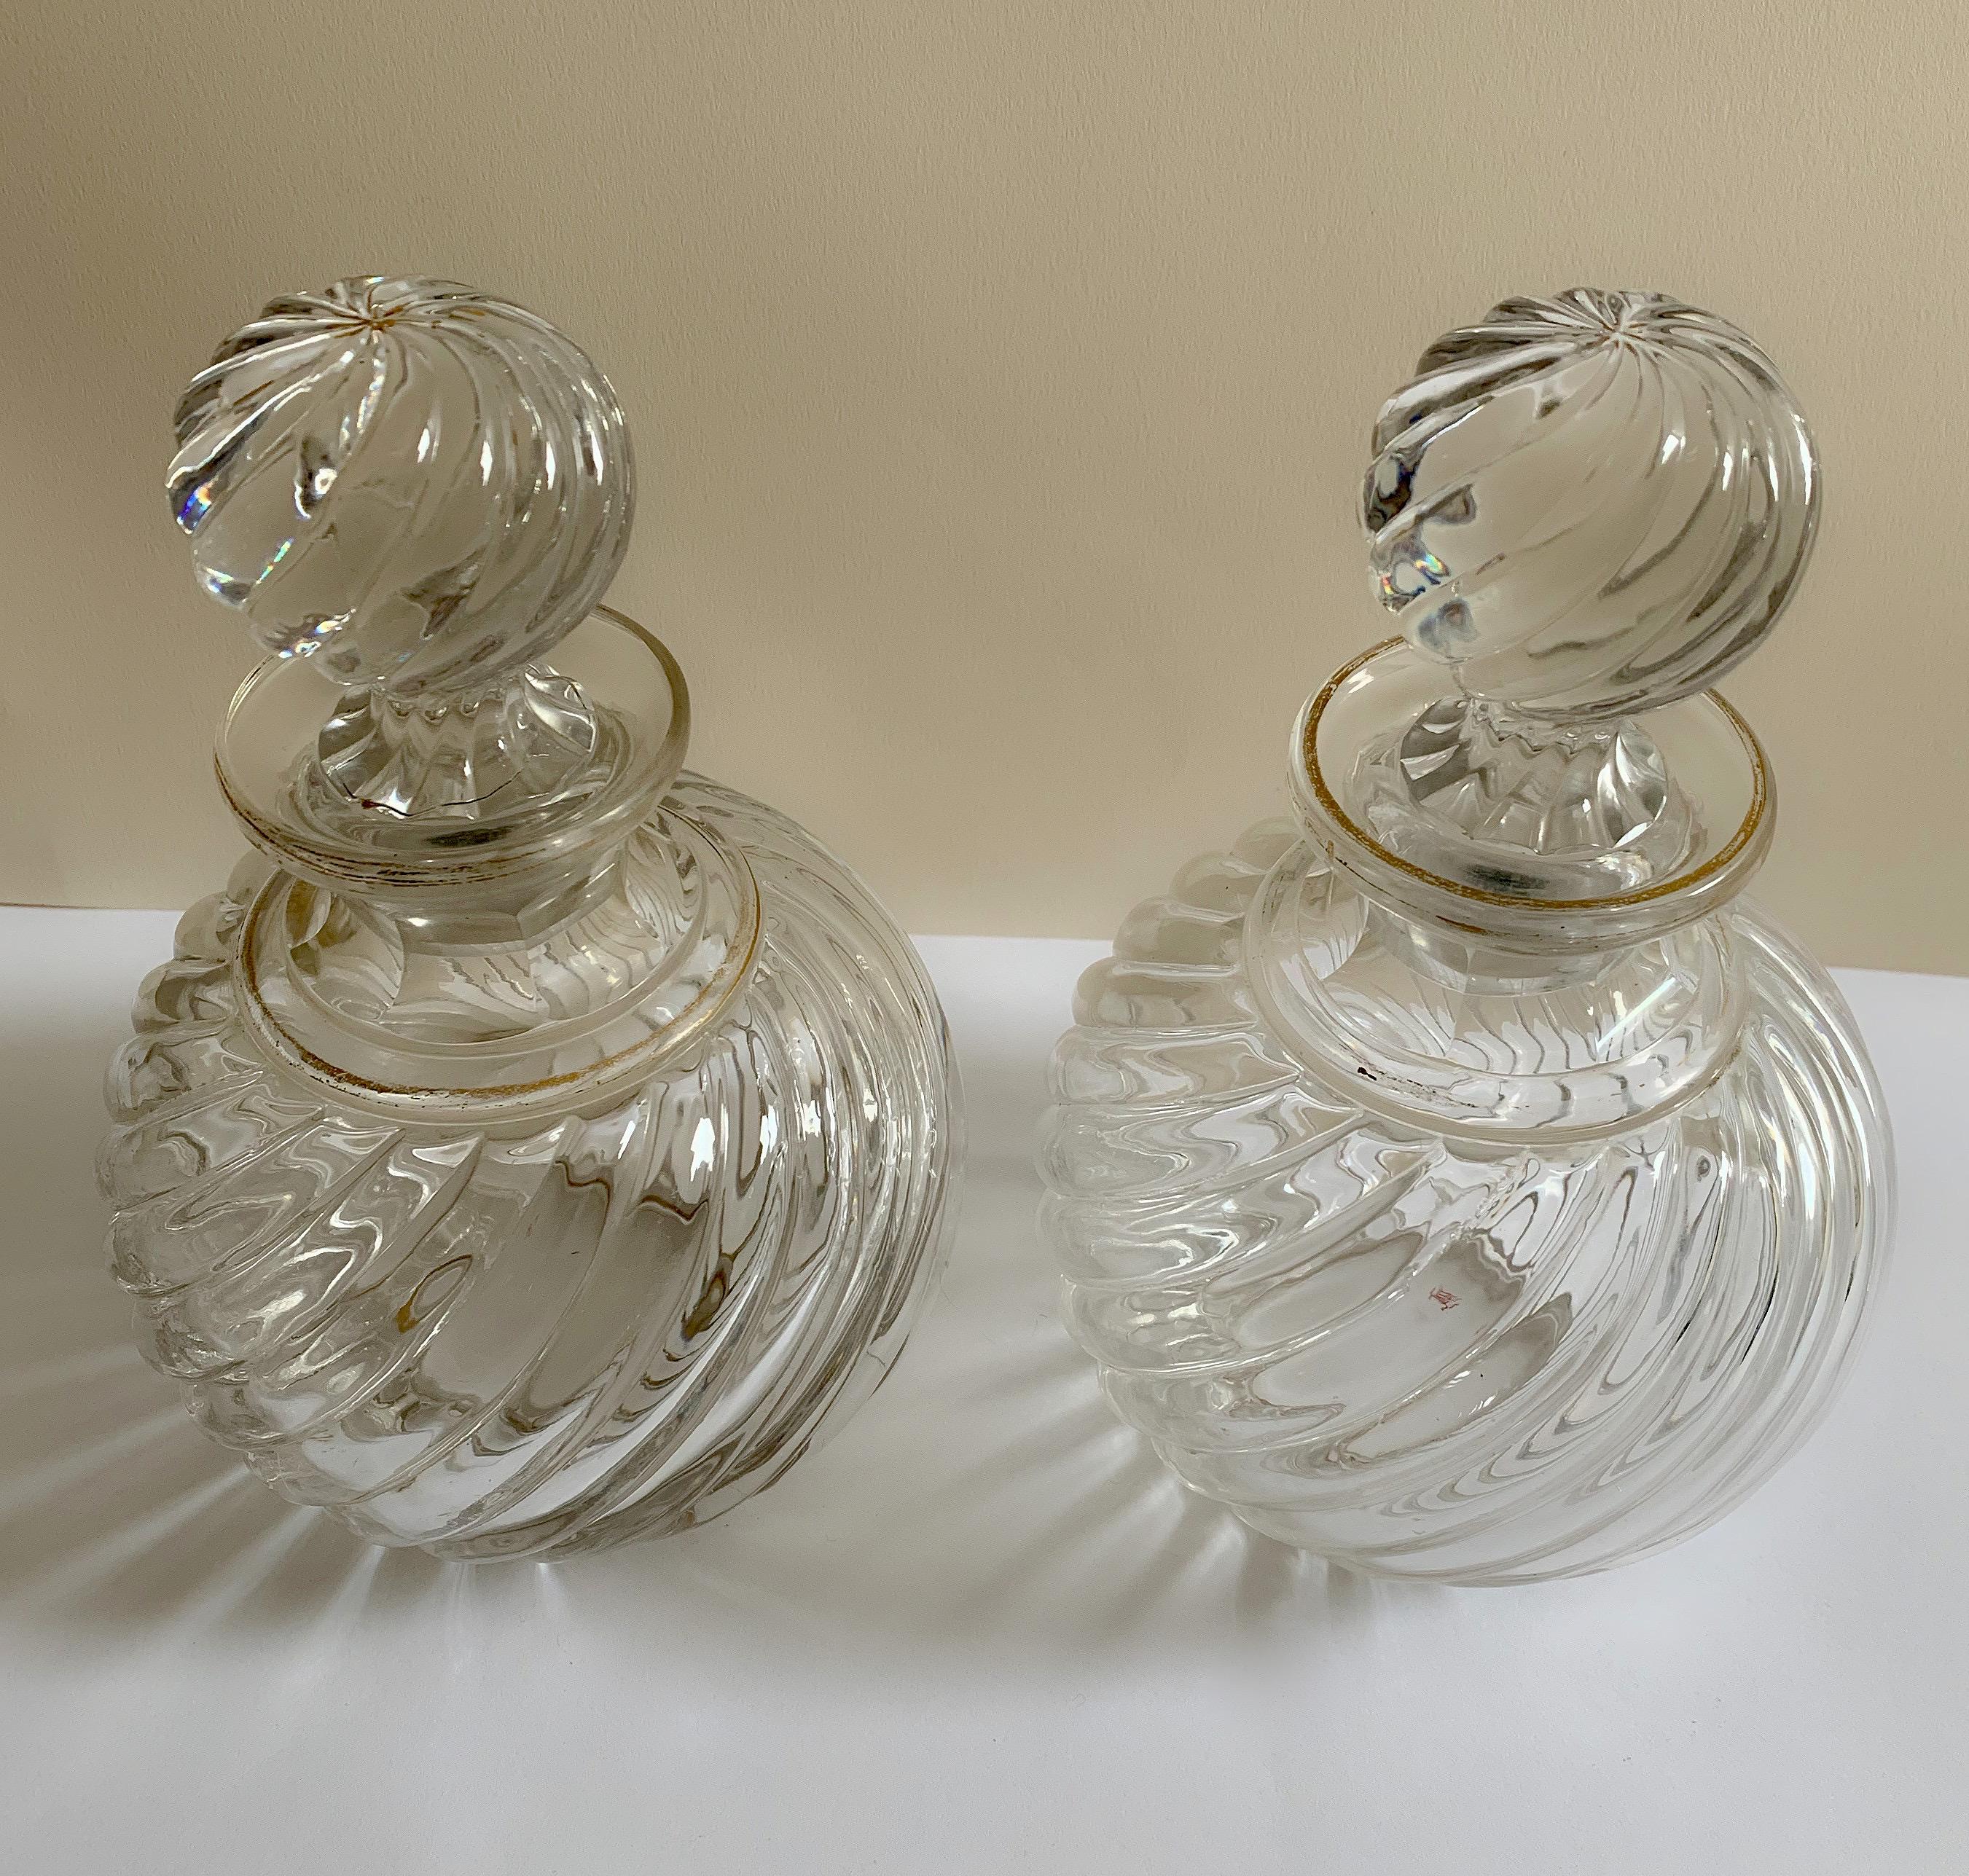 Pair of French antique Baccarat bottles in a swirled bamboo pattern.
Original lid.
Measures: Height 19.50 cm
Circumference: 40.00 cm.